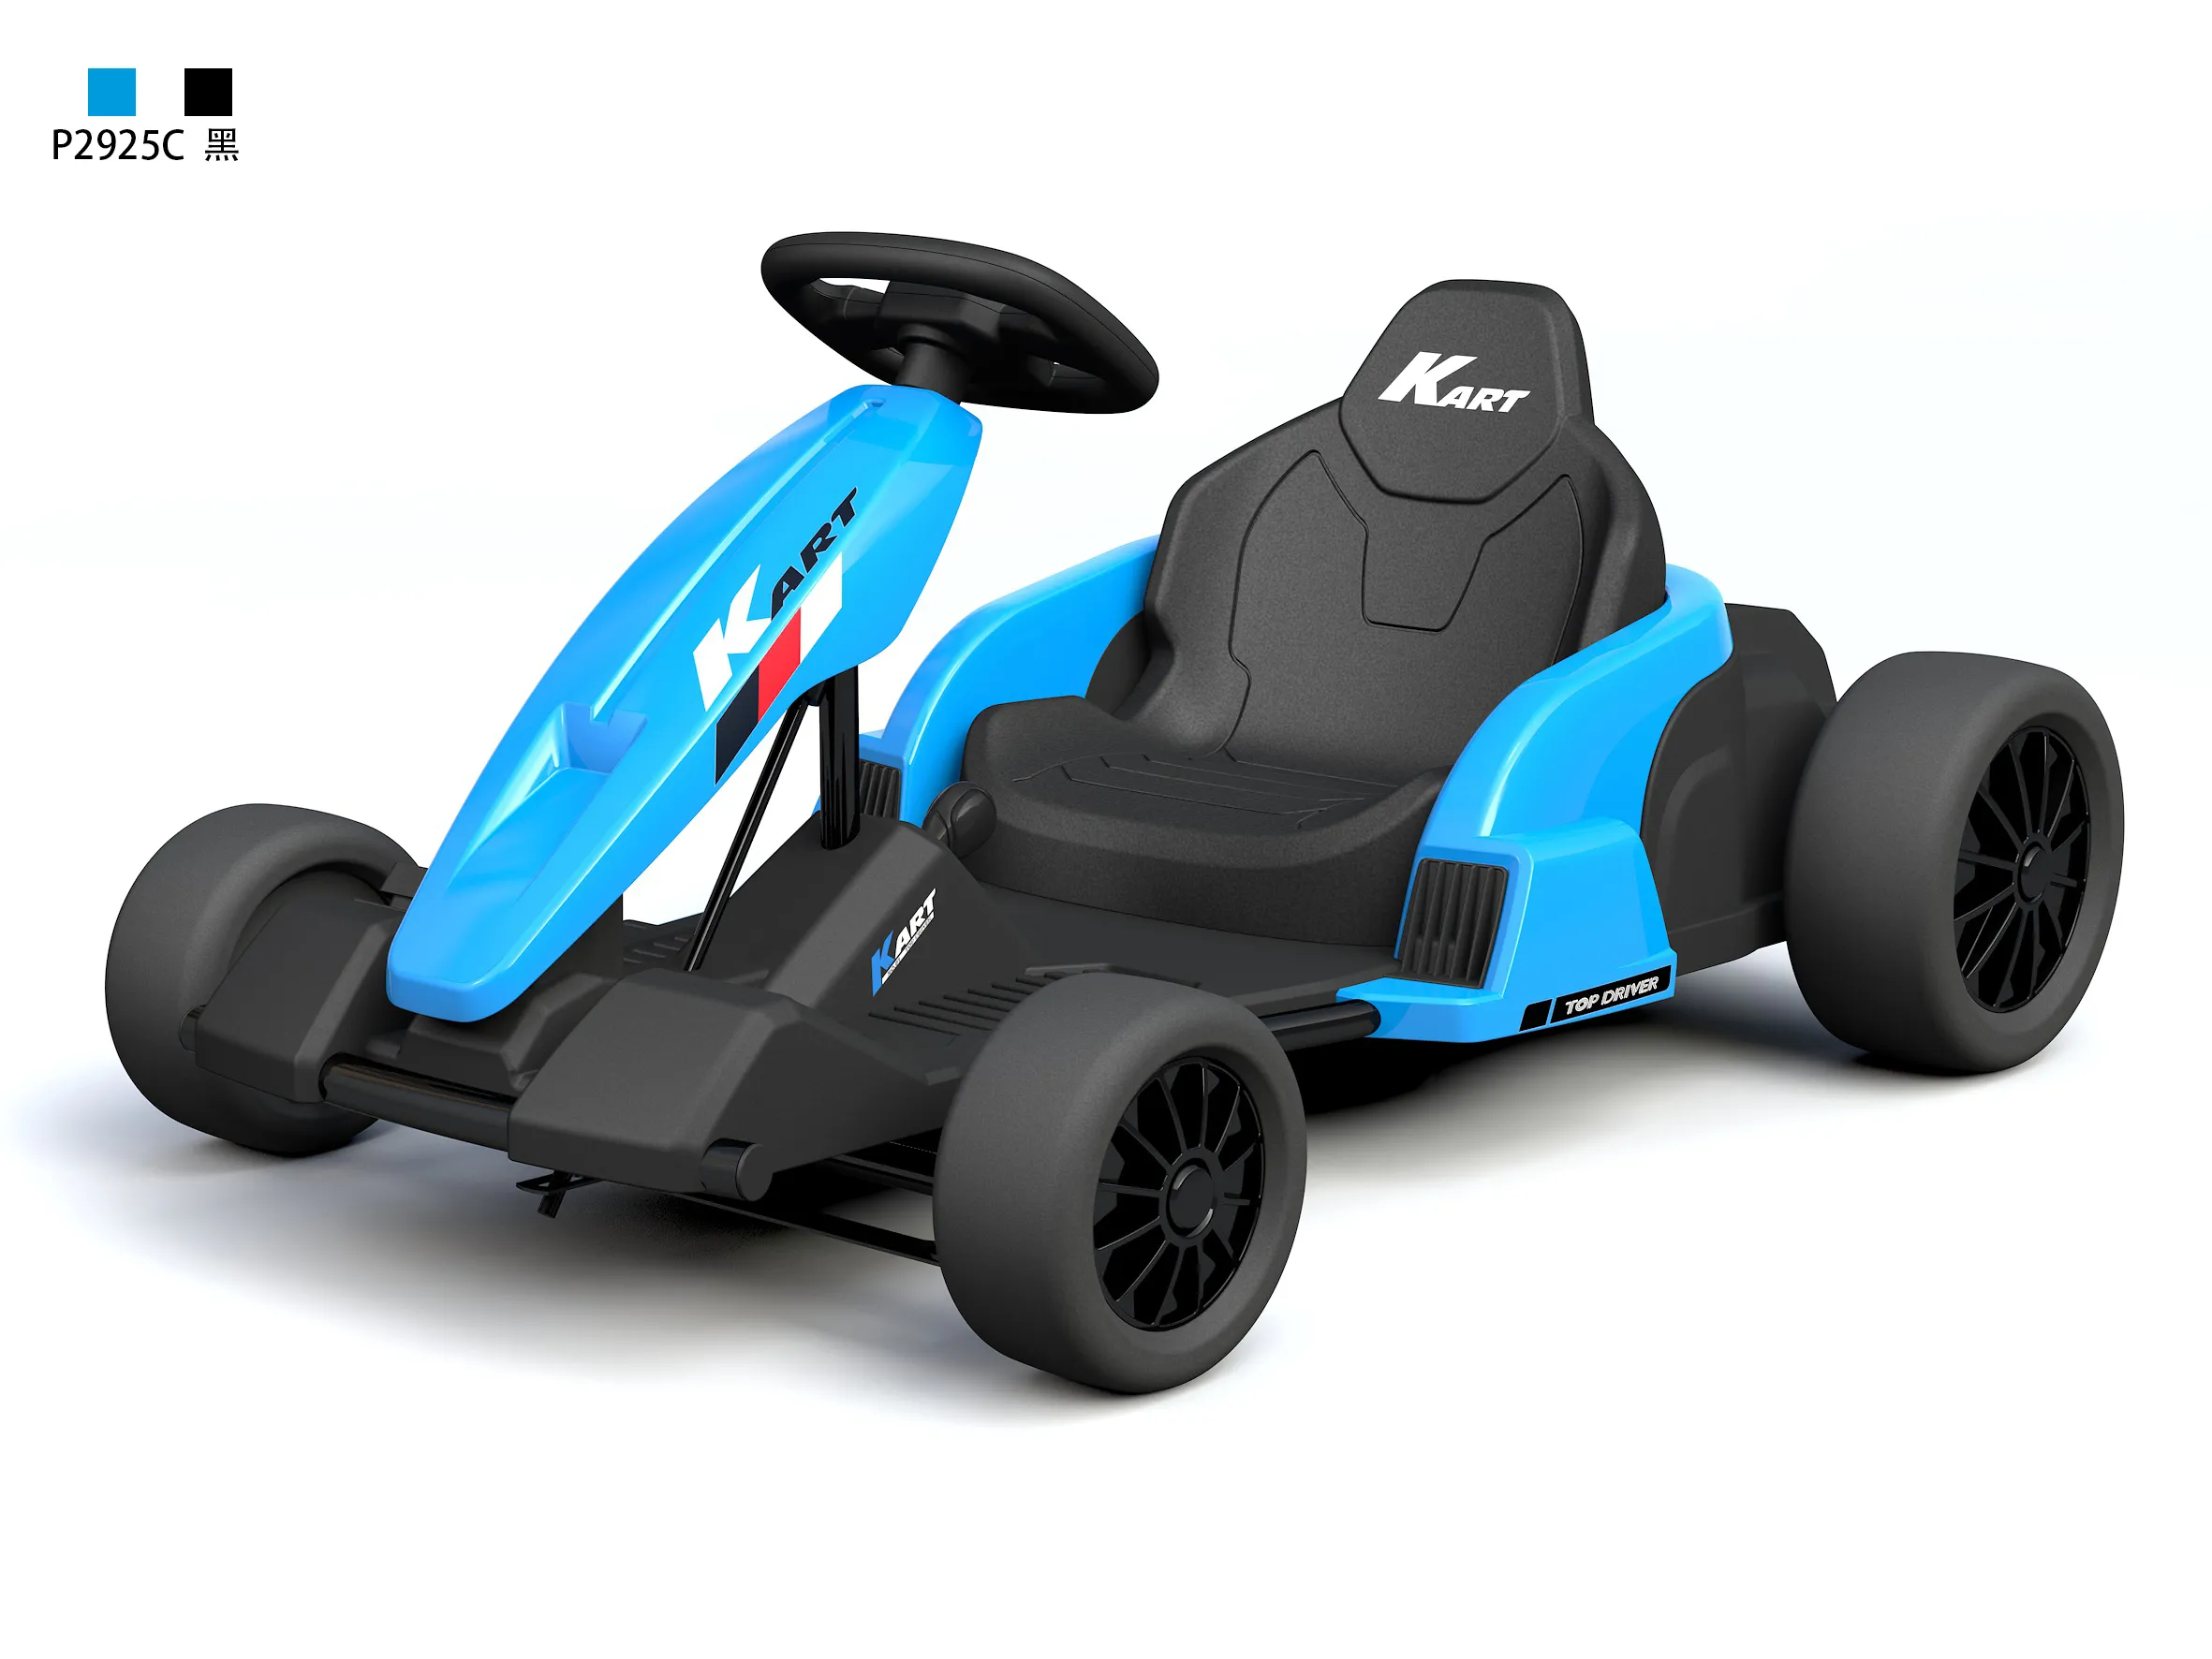 Wholesale Electric Go Karts For Kids Drift Ride On Timmy Pedal For Racing  Fun At An Affordable Price From Toyrus2020, $989.47